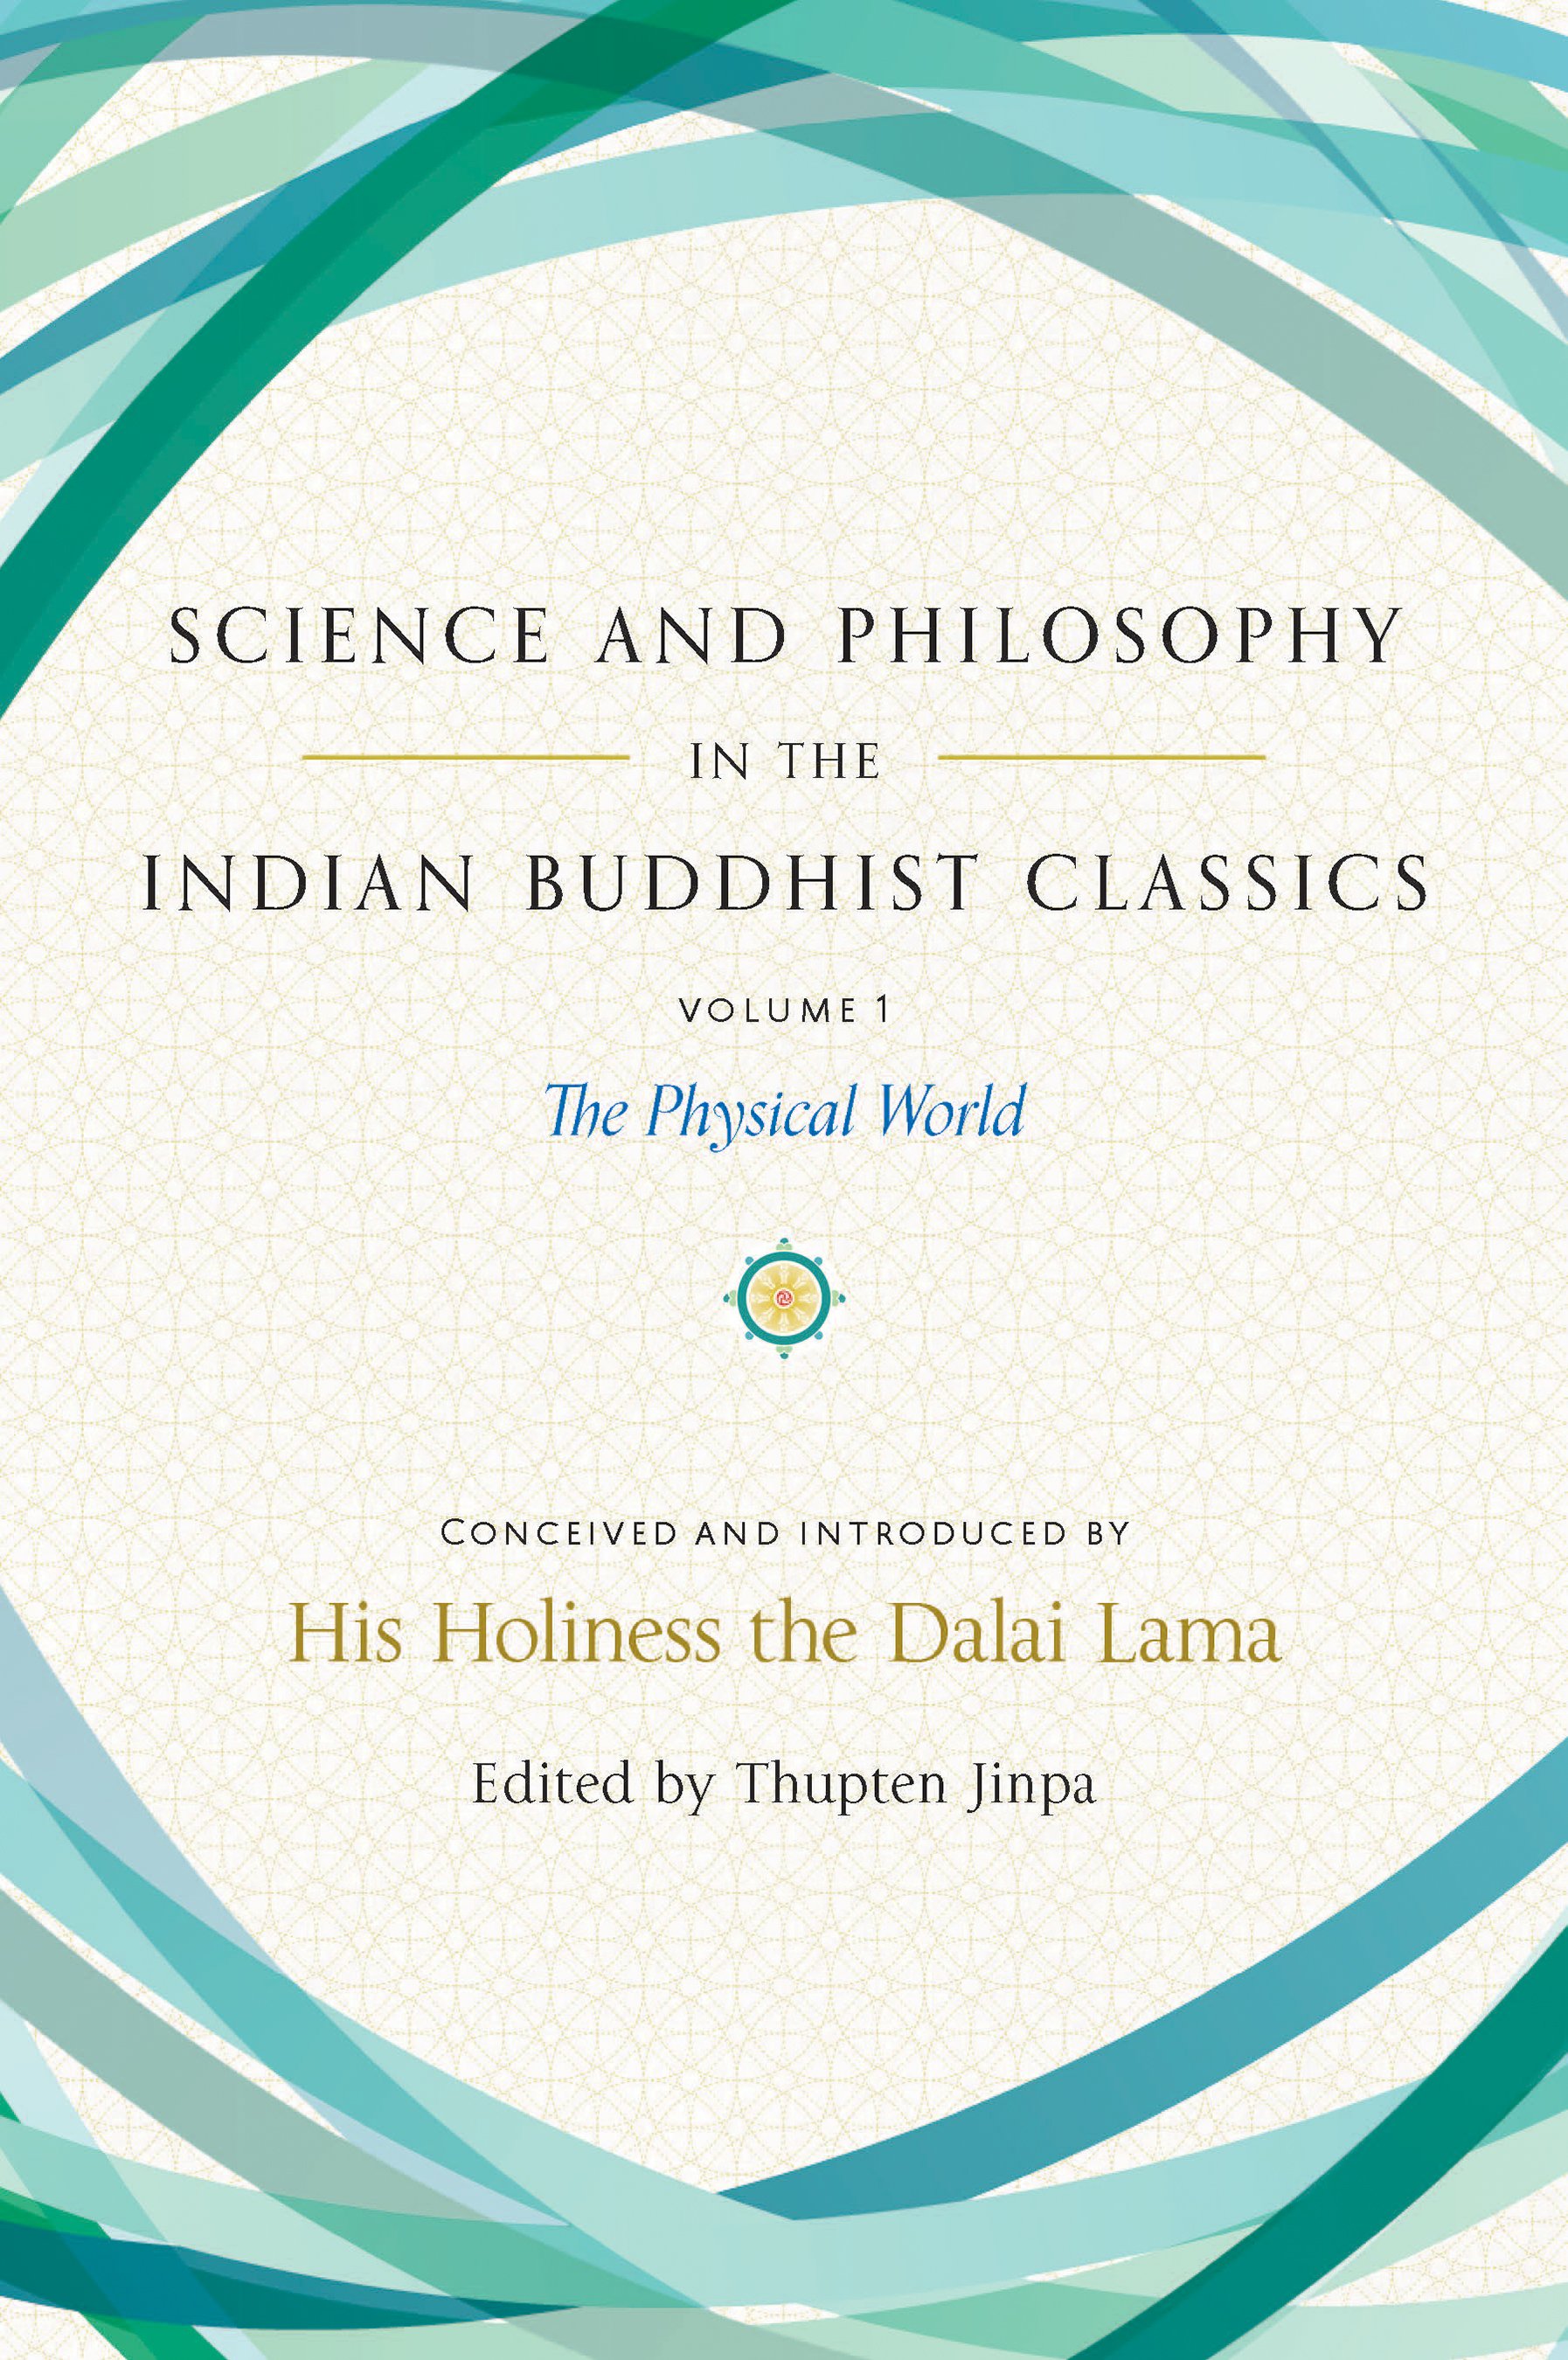 Buddhism, knowledge, and liberation - a philosophical analysis of suffering